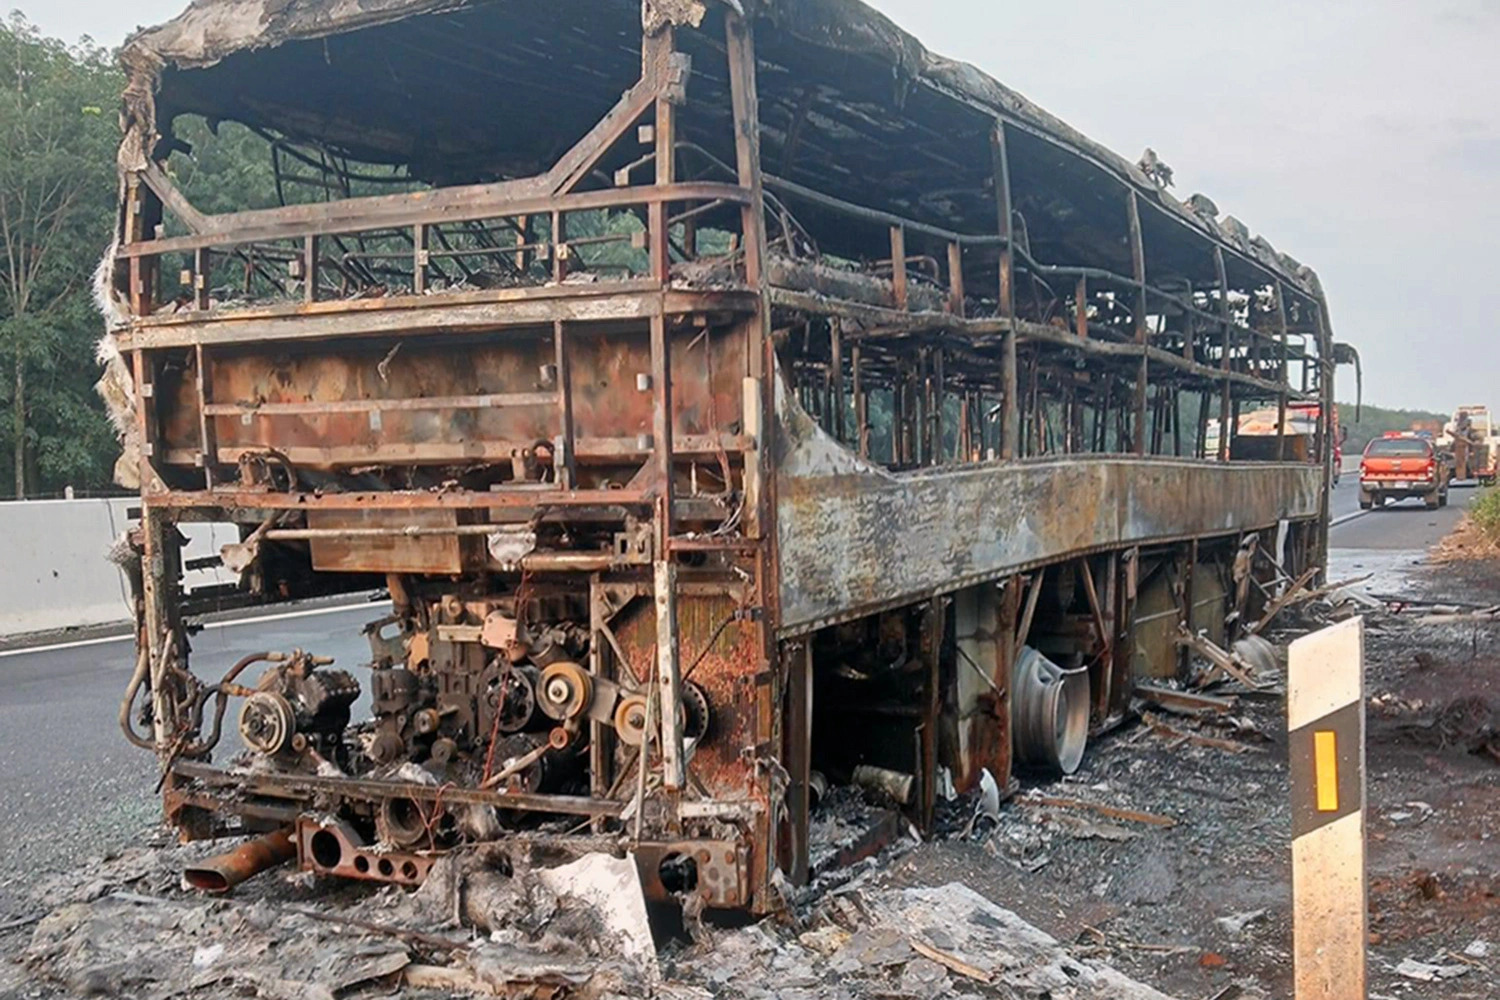 The fire-hit sleeper bus. Photo: Supplied